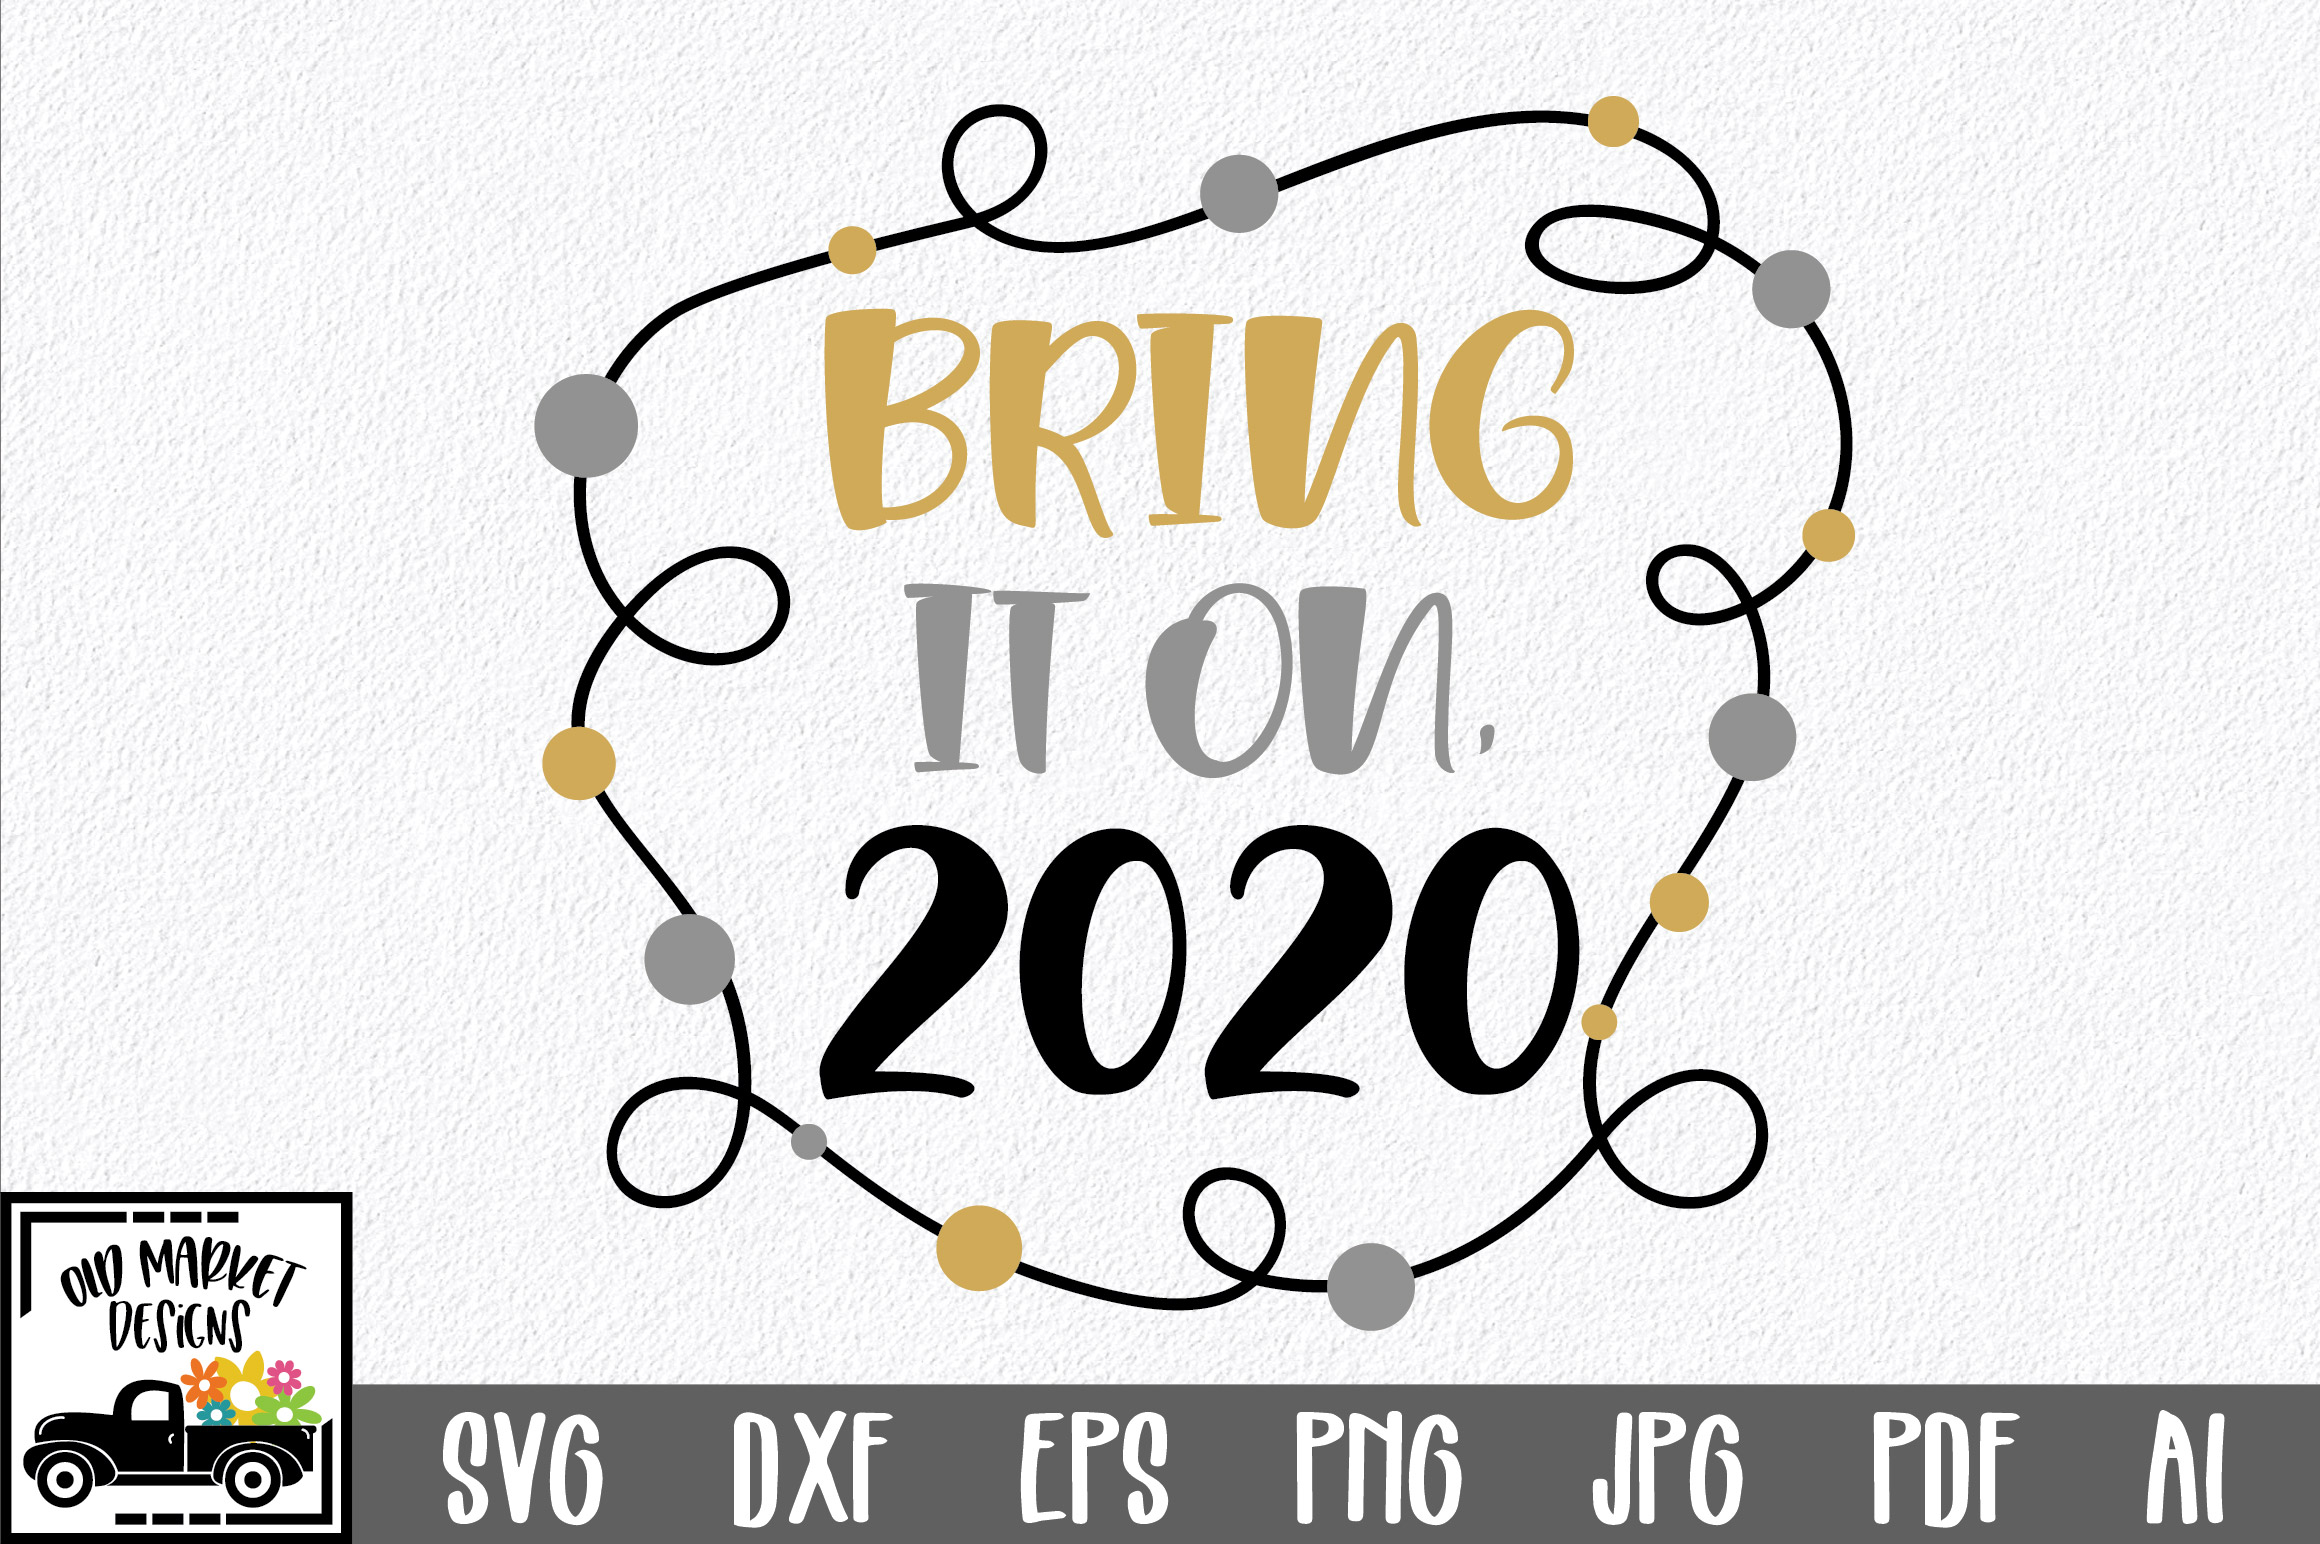 Download Bring It On, 2020 SVG Cut File - New Year's SVG DXF EPS PNG